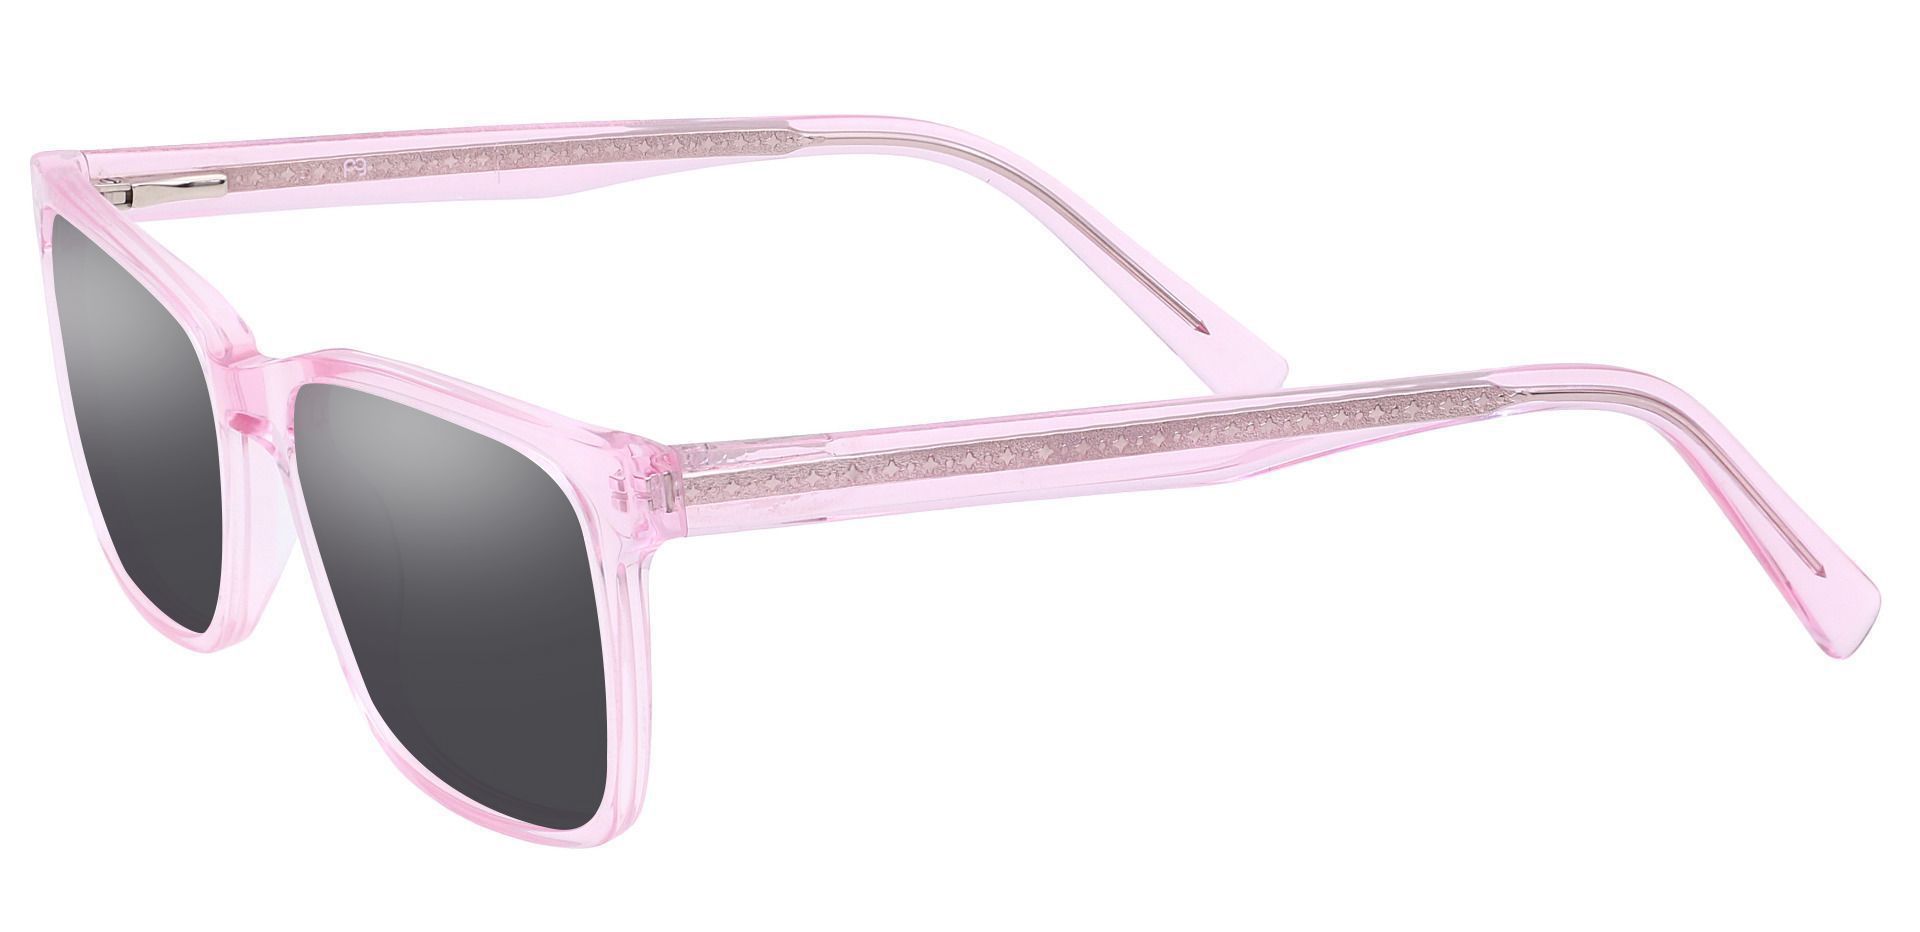 Galaxy Rectangle Non-Rx Sunglasses - Pink Frame With Gray Lenses